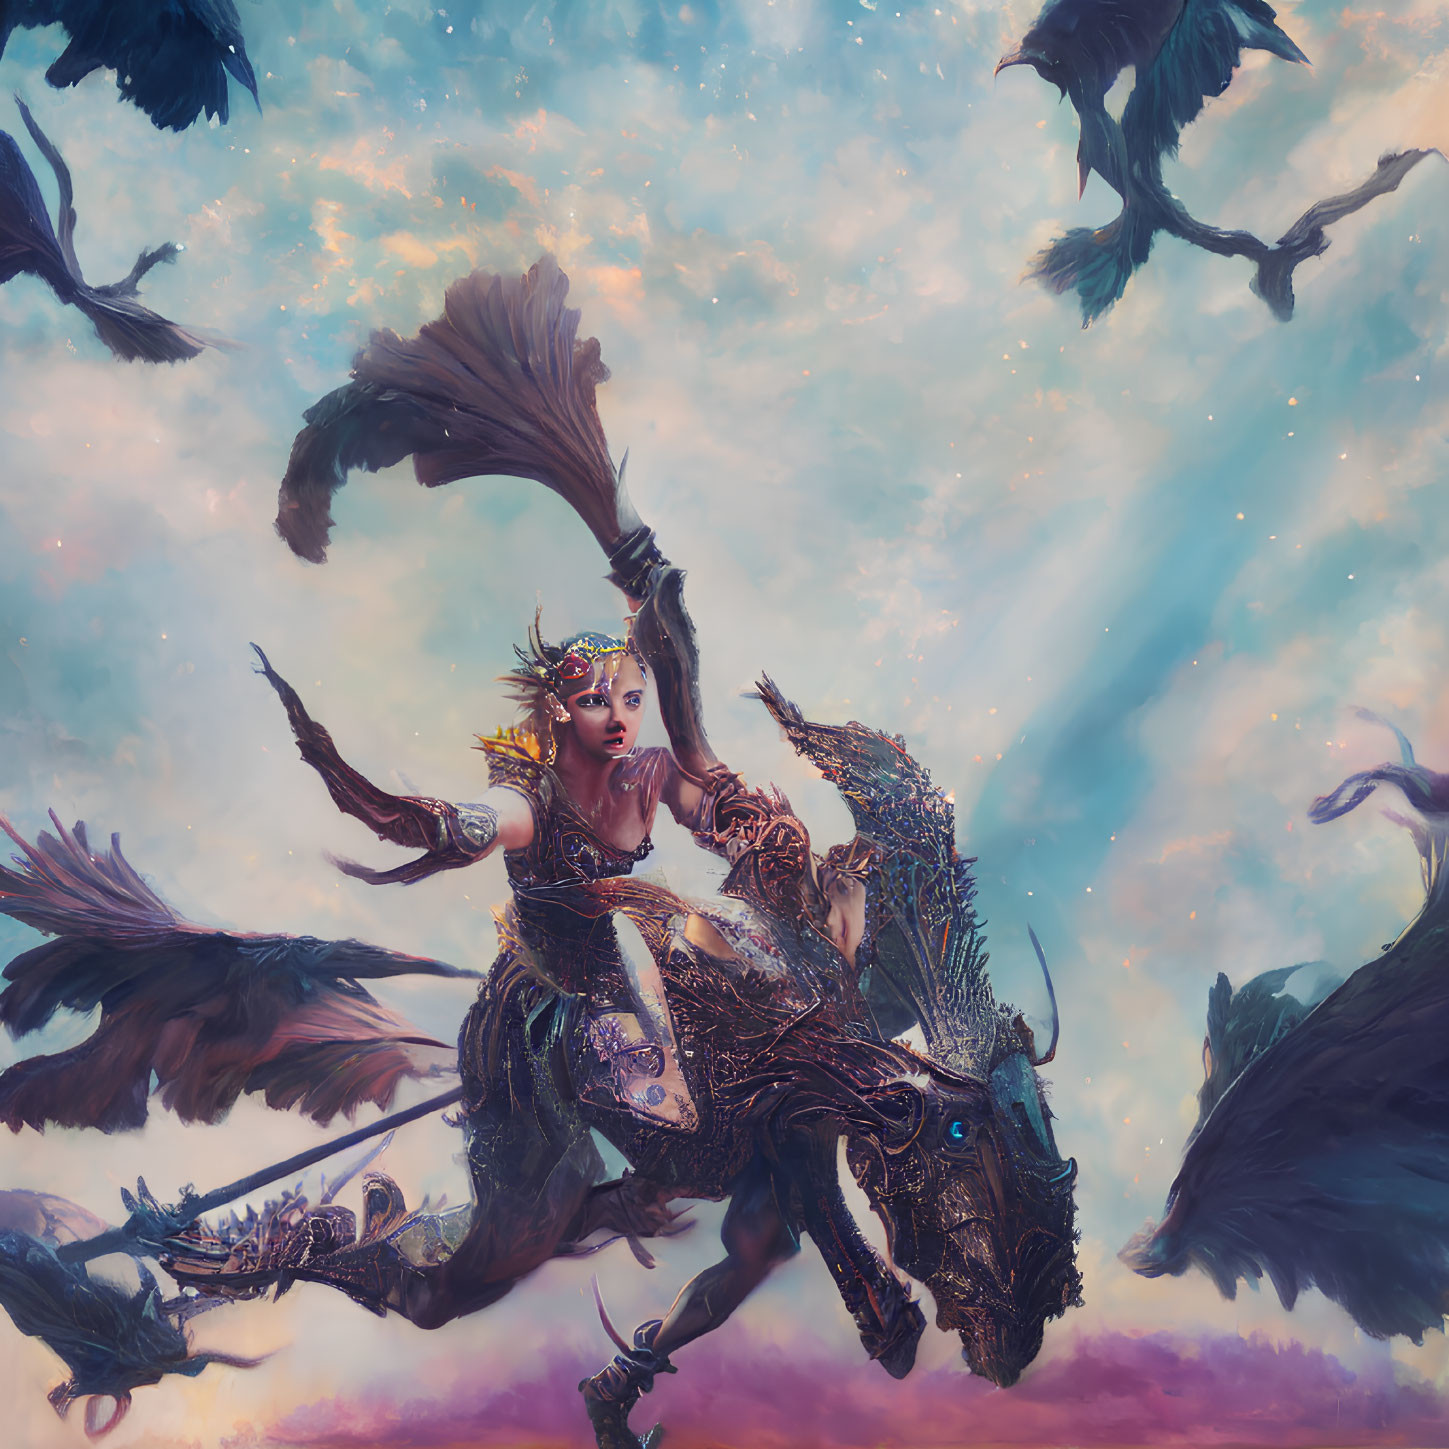 Warrior riding mythical dragon with spear in pastel-colored sky